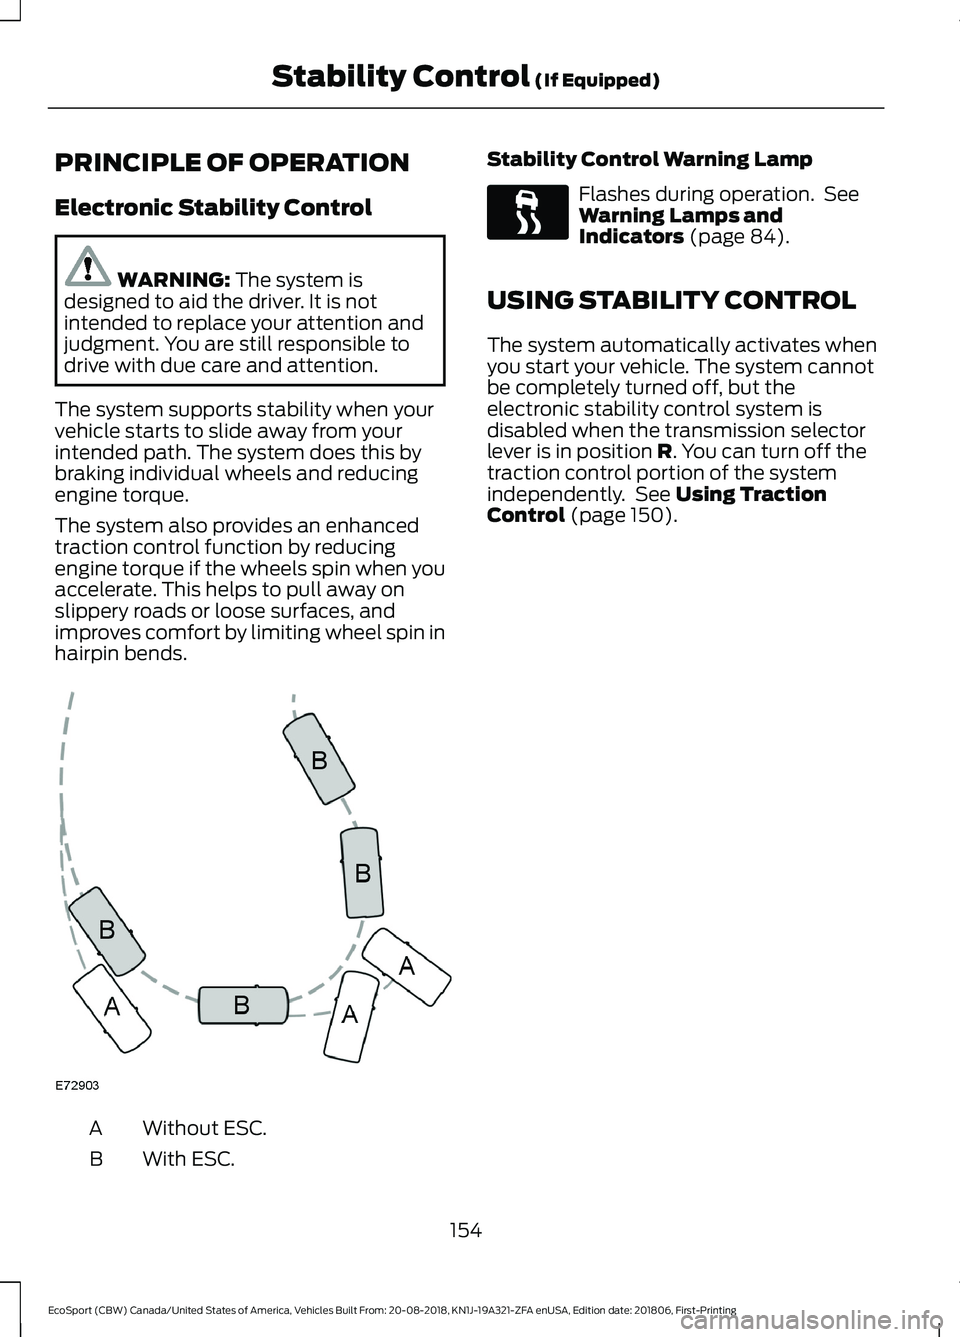 FORD ECOSPORT 2019  Owners Manual PRINCIPLE OF OPERATION
Electronic Stability Control
WARNING: The system isdesigned to aid the driver. It is notintended to replace your attention andjudgment. You are still responsible todrive with du